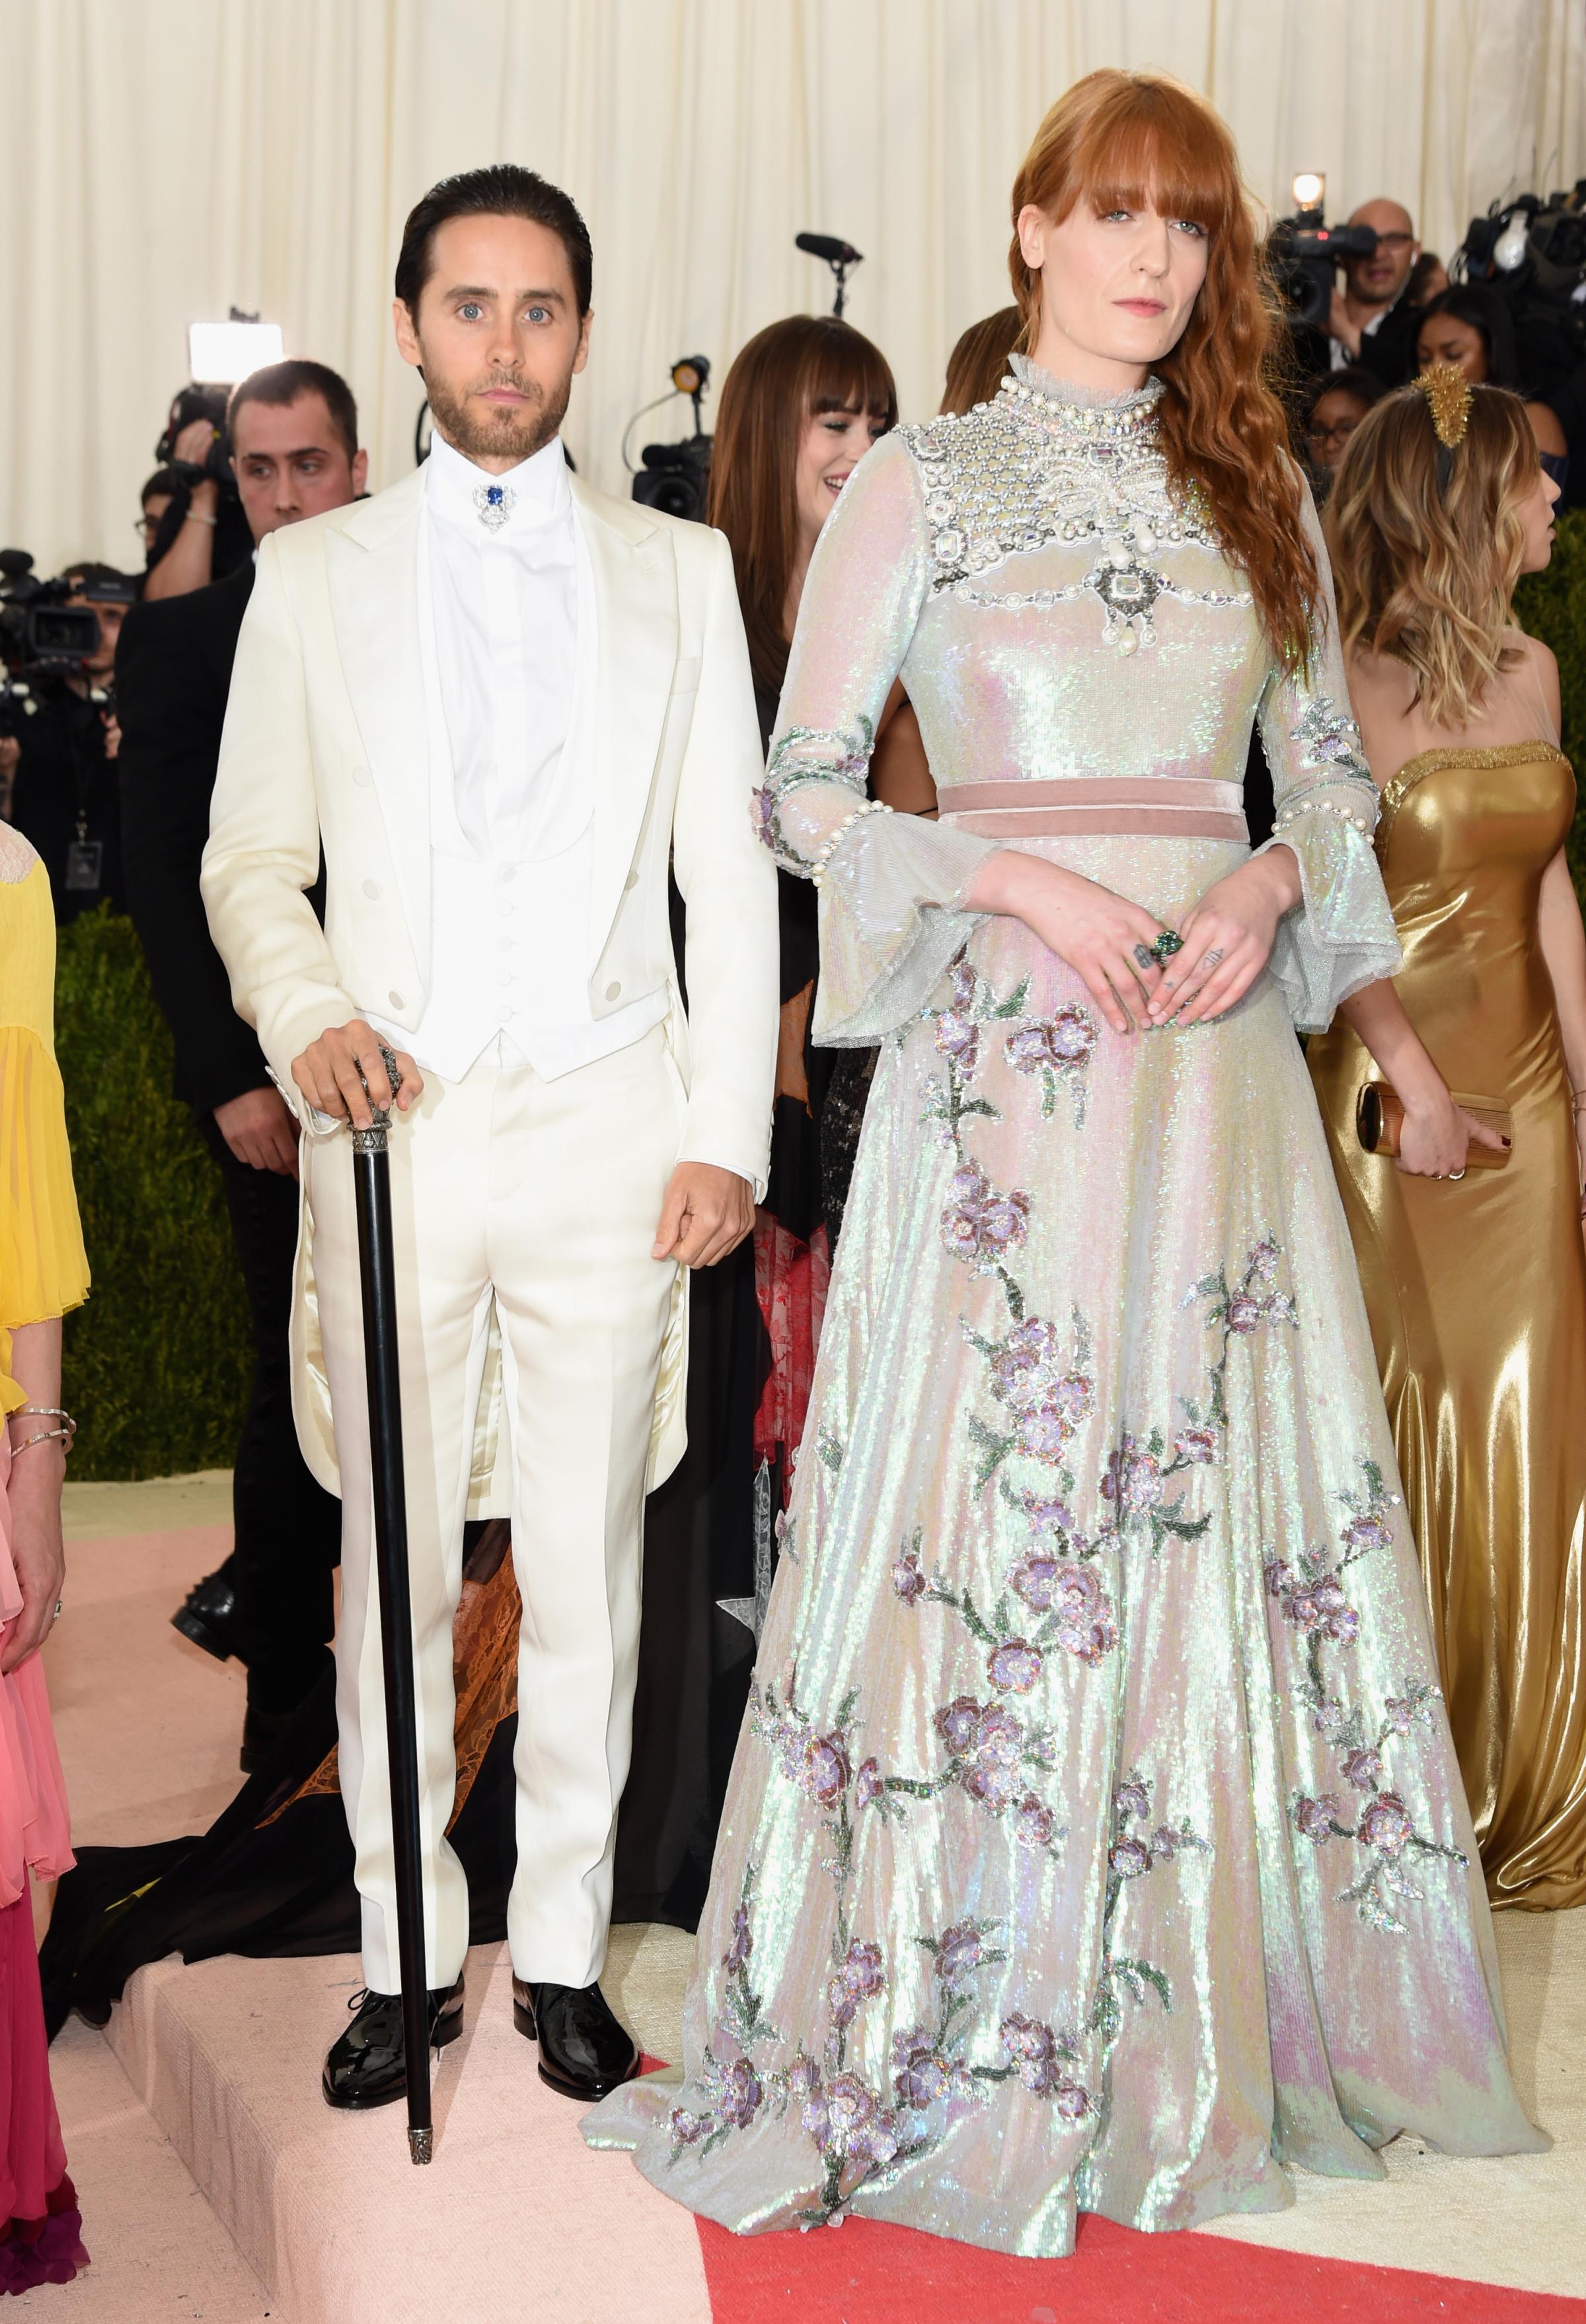 Jared Leto and Florence Welch attend "Manus x Machina: Fashion In An Age Of Technology" Costume Institute Gala at Metropolitan Museum of Art on May 2, 2016 in New York City.